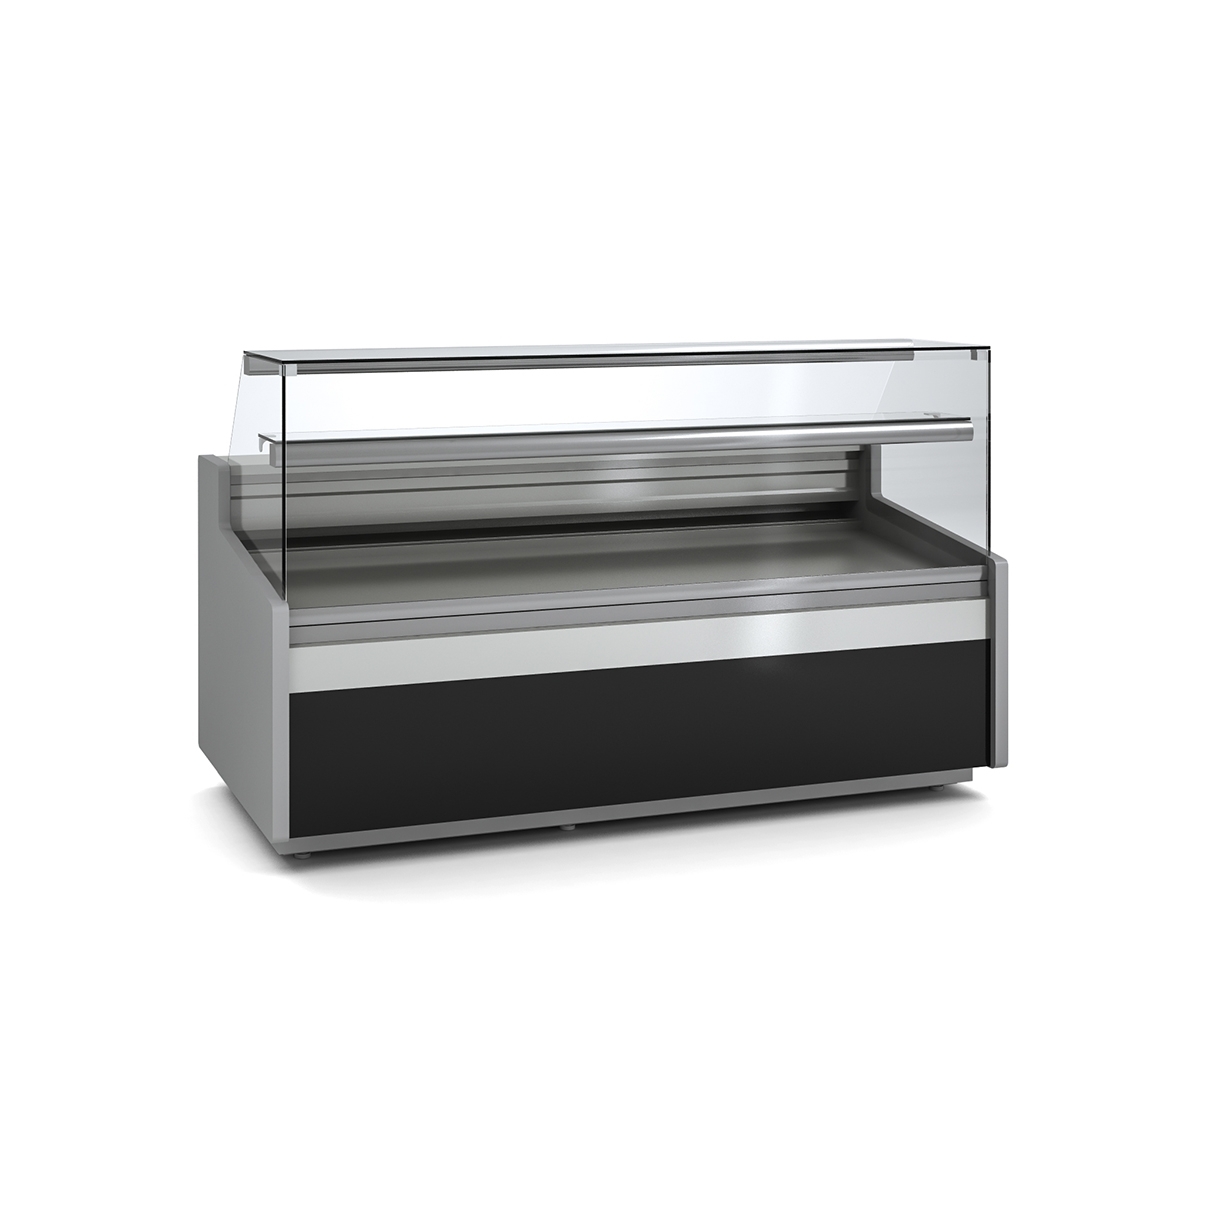 MODULAR REFRIGERATED DISPLAY CABINET VE-9-RC